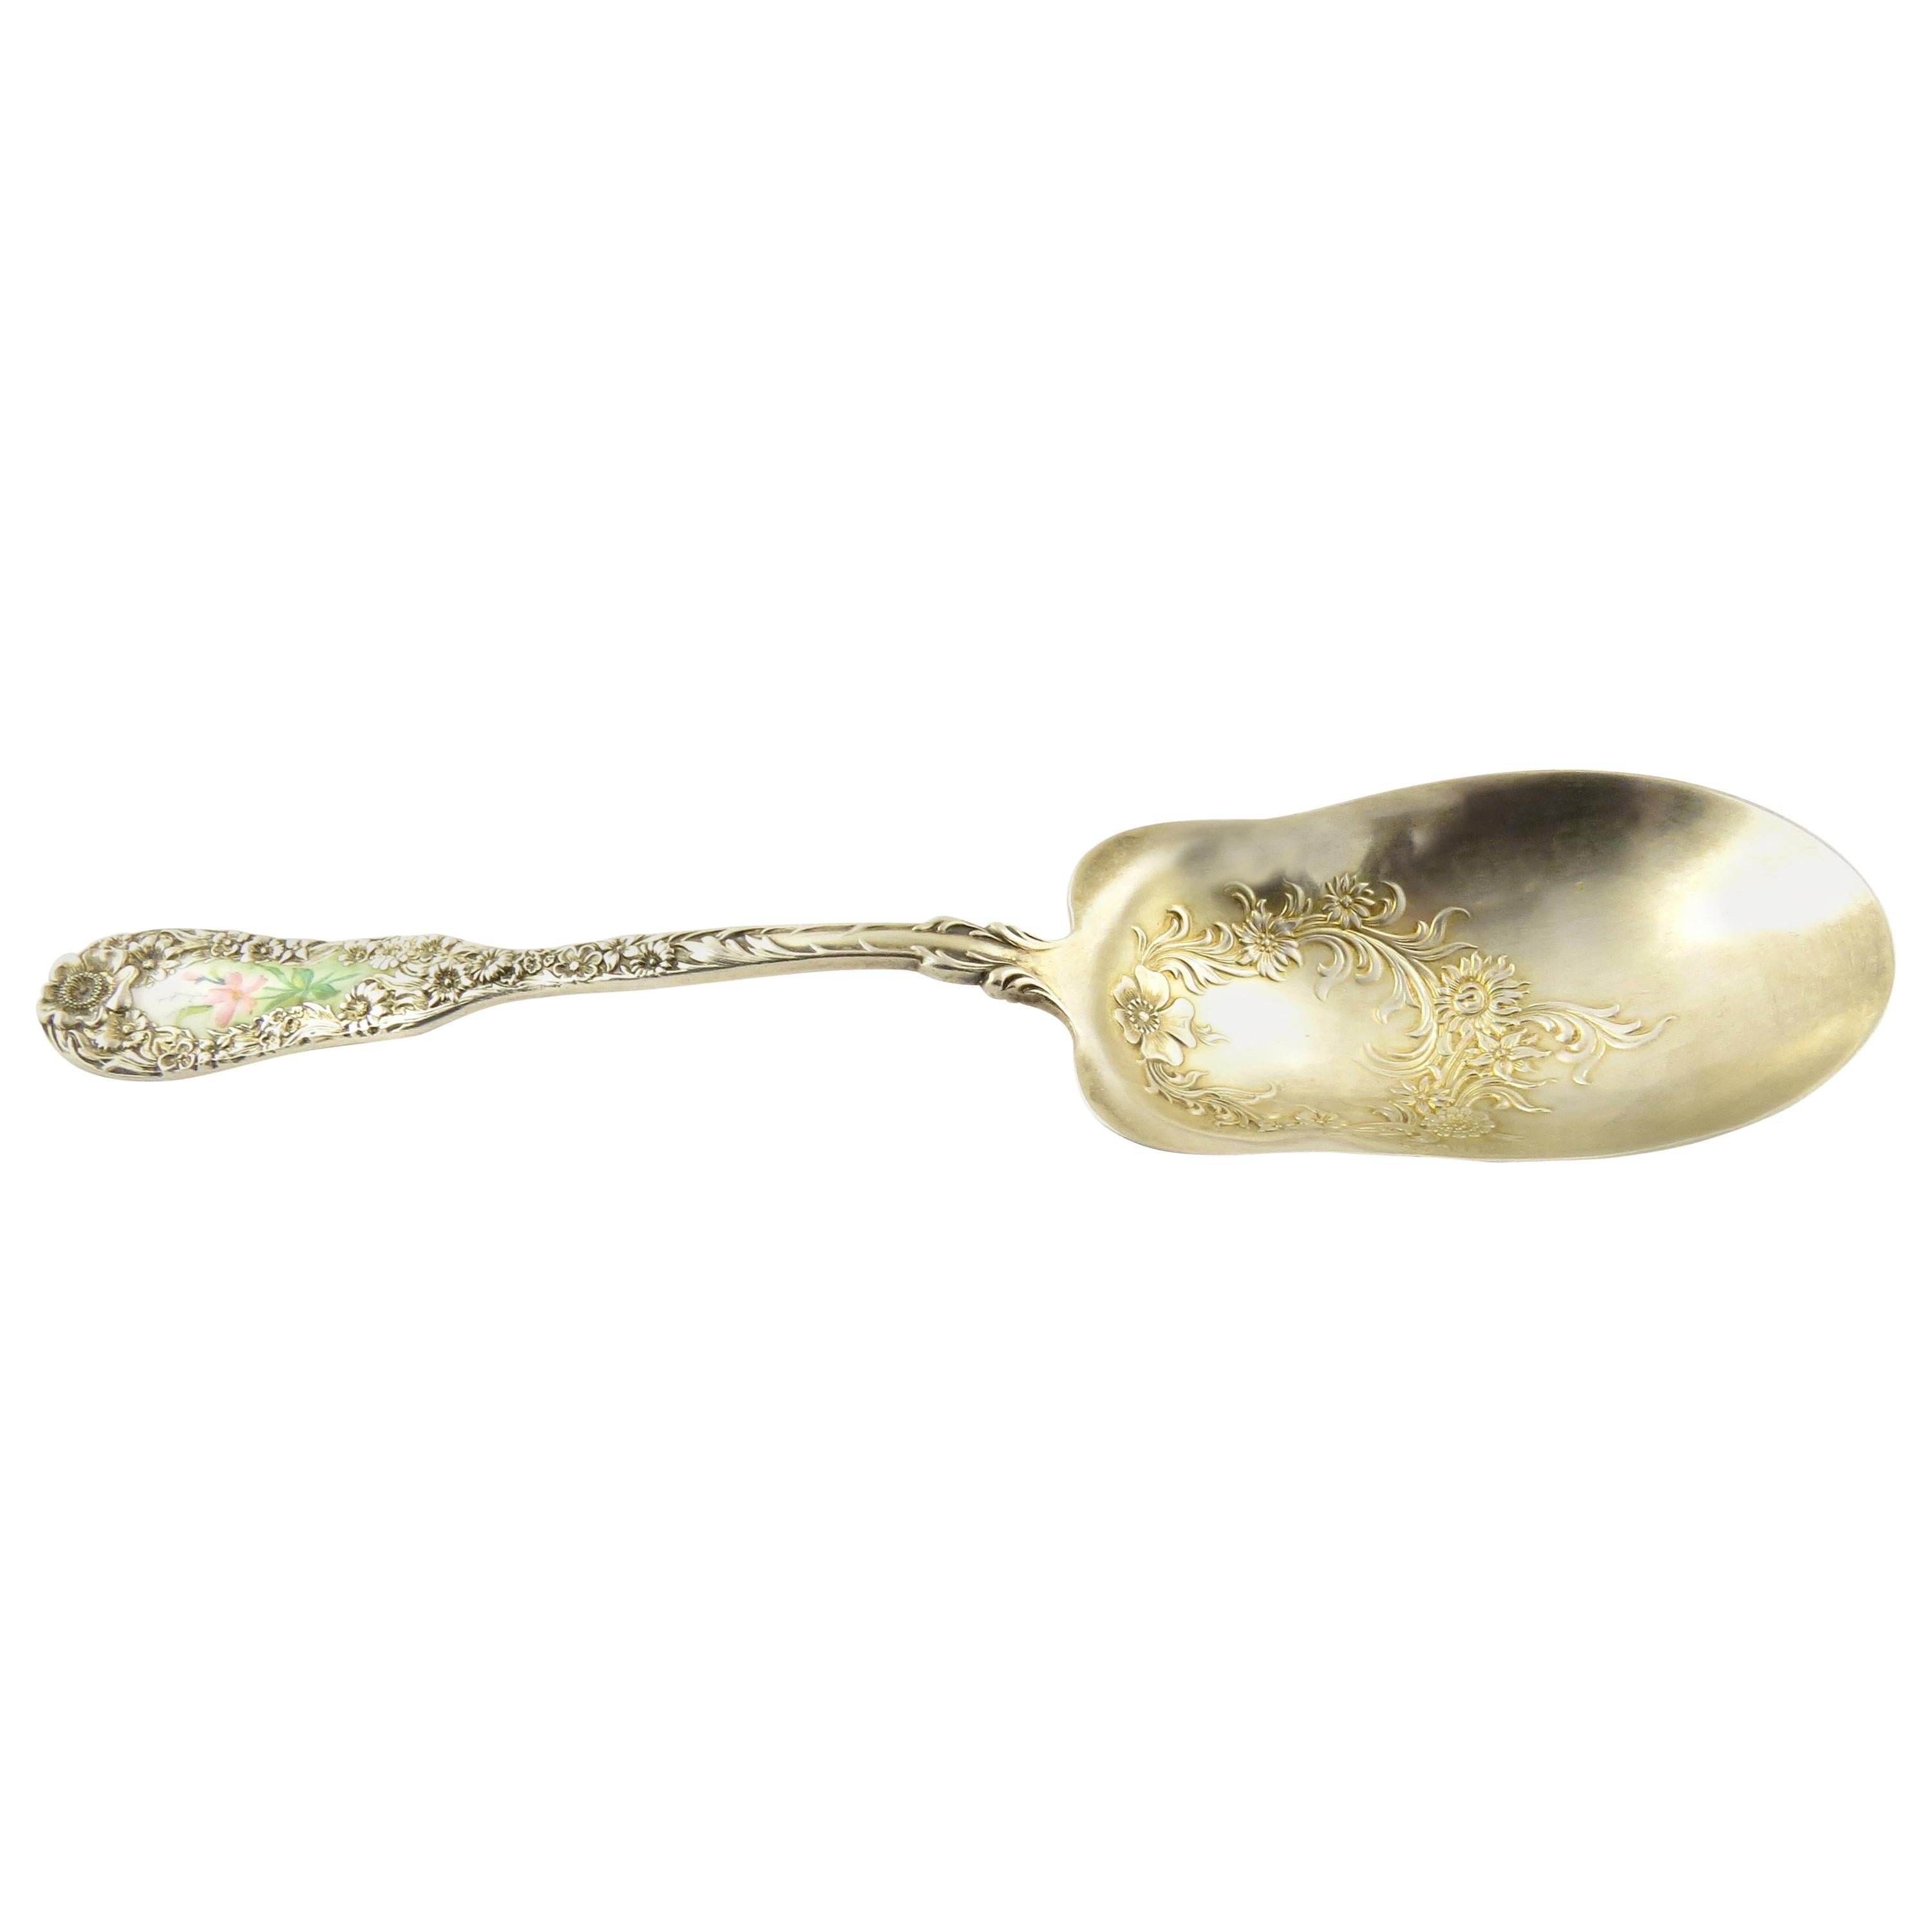 Dominick & Haff No.10 Sterling Silver Enameled Gilt Small Berry Spoon For Sale